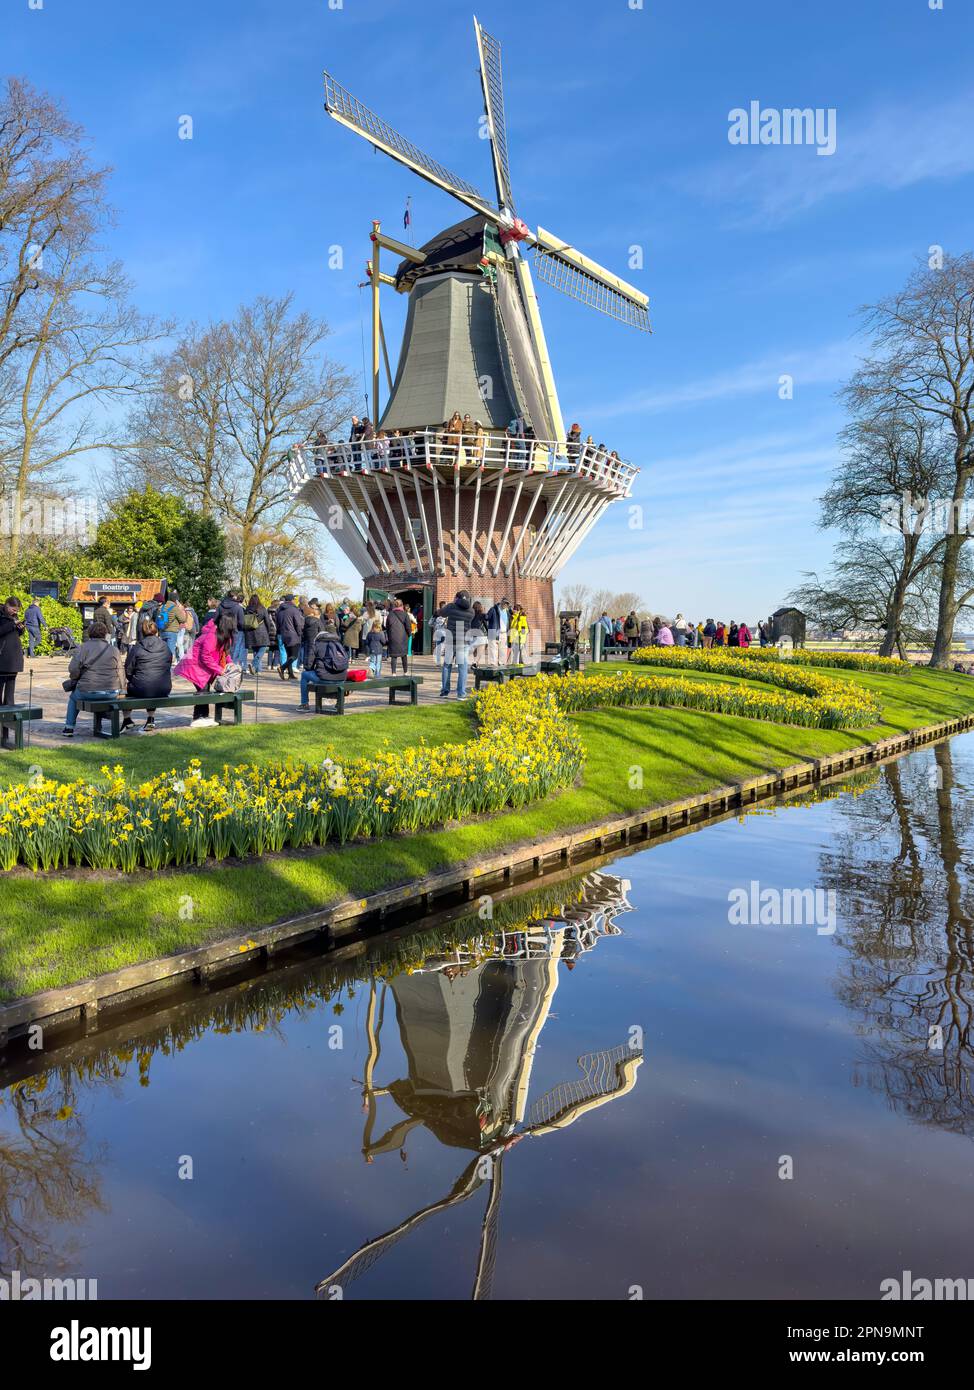 The Mill, Keukenhof Gardens, Lisse, South Holland (Zuid-Holland), Kingdom of the Netherlands Stock Photo